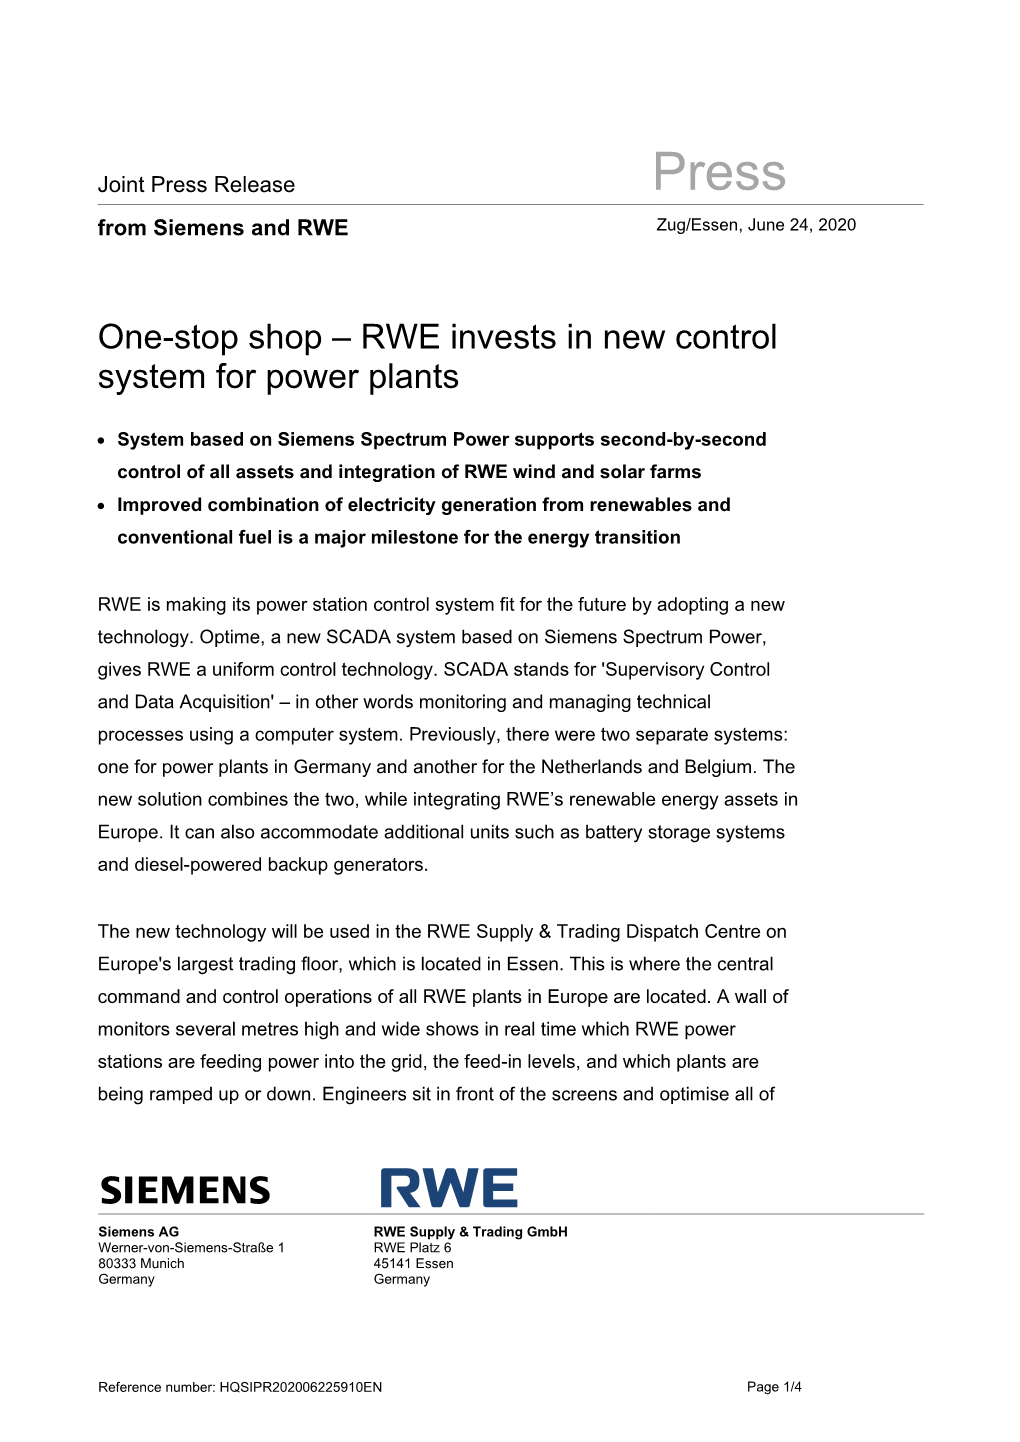 RWE Invests in New Control System for Power Plants